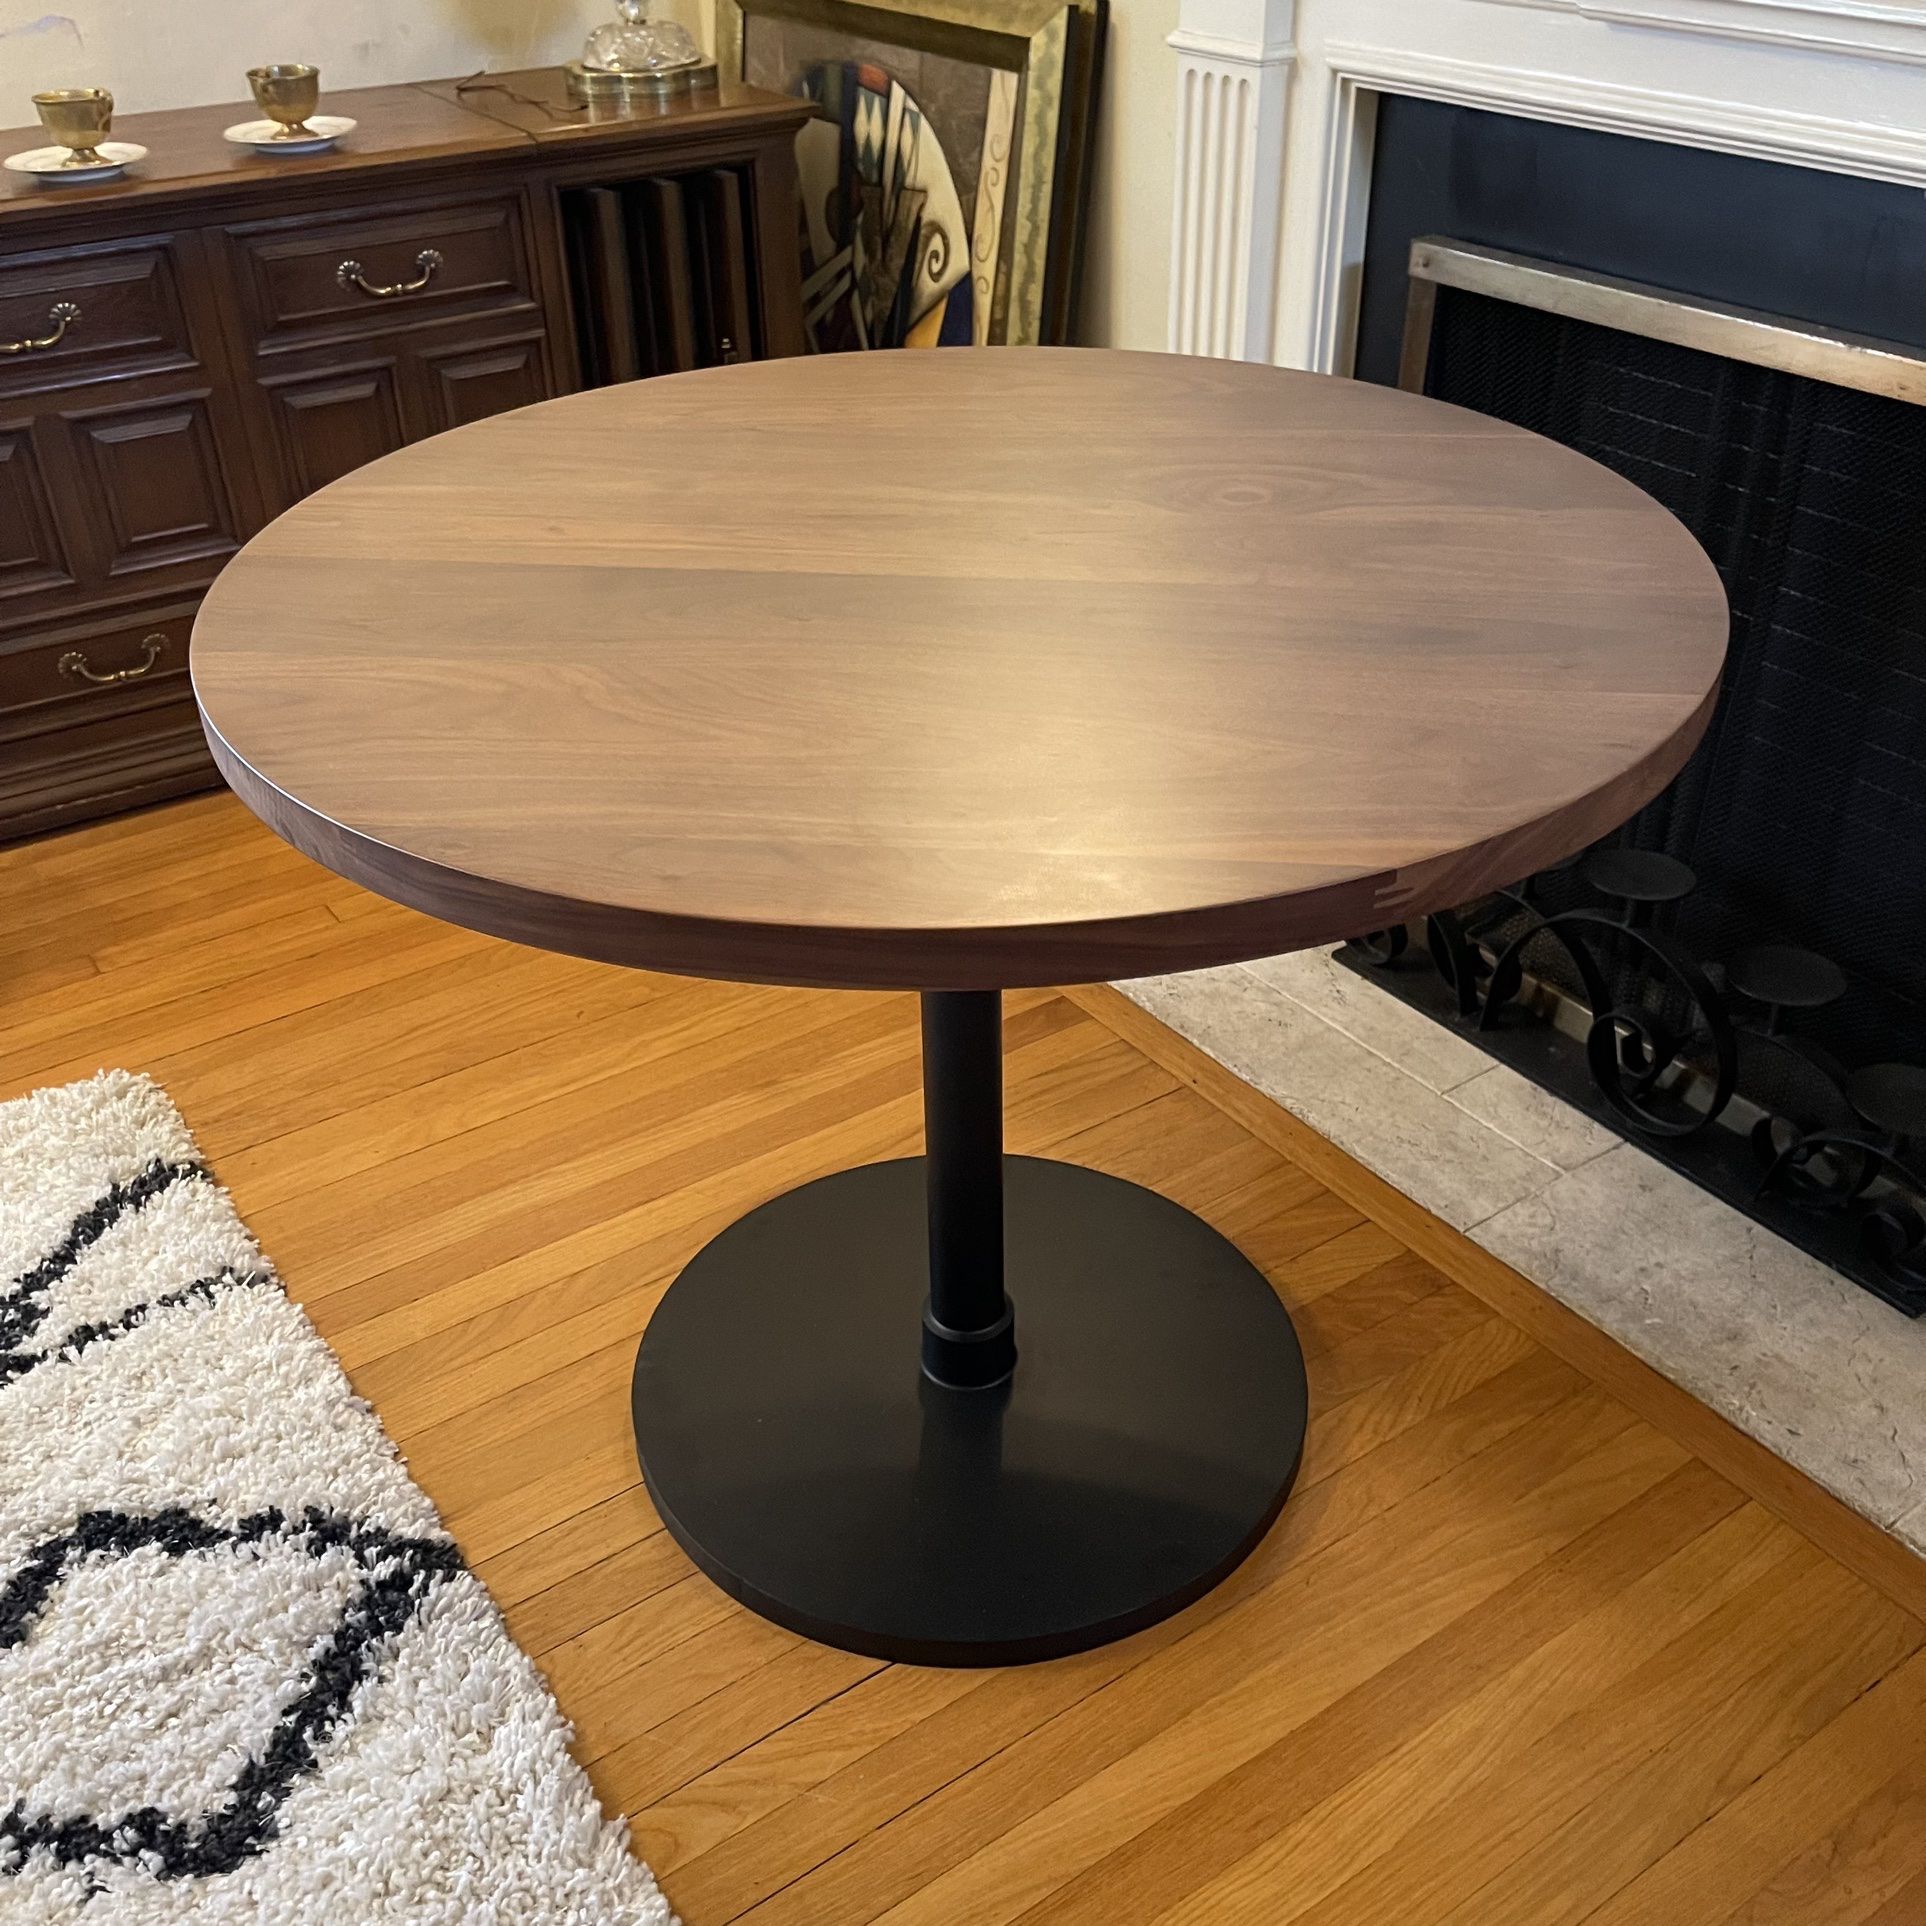 HD Buttercup Walnut 36" Round Table NEW Bistro Dining Table